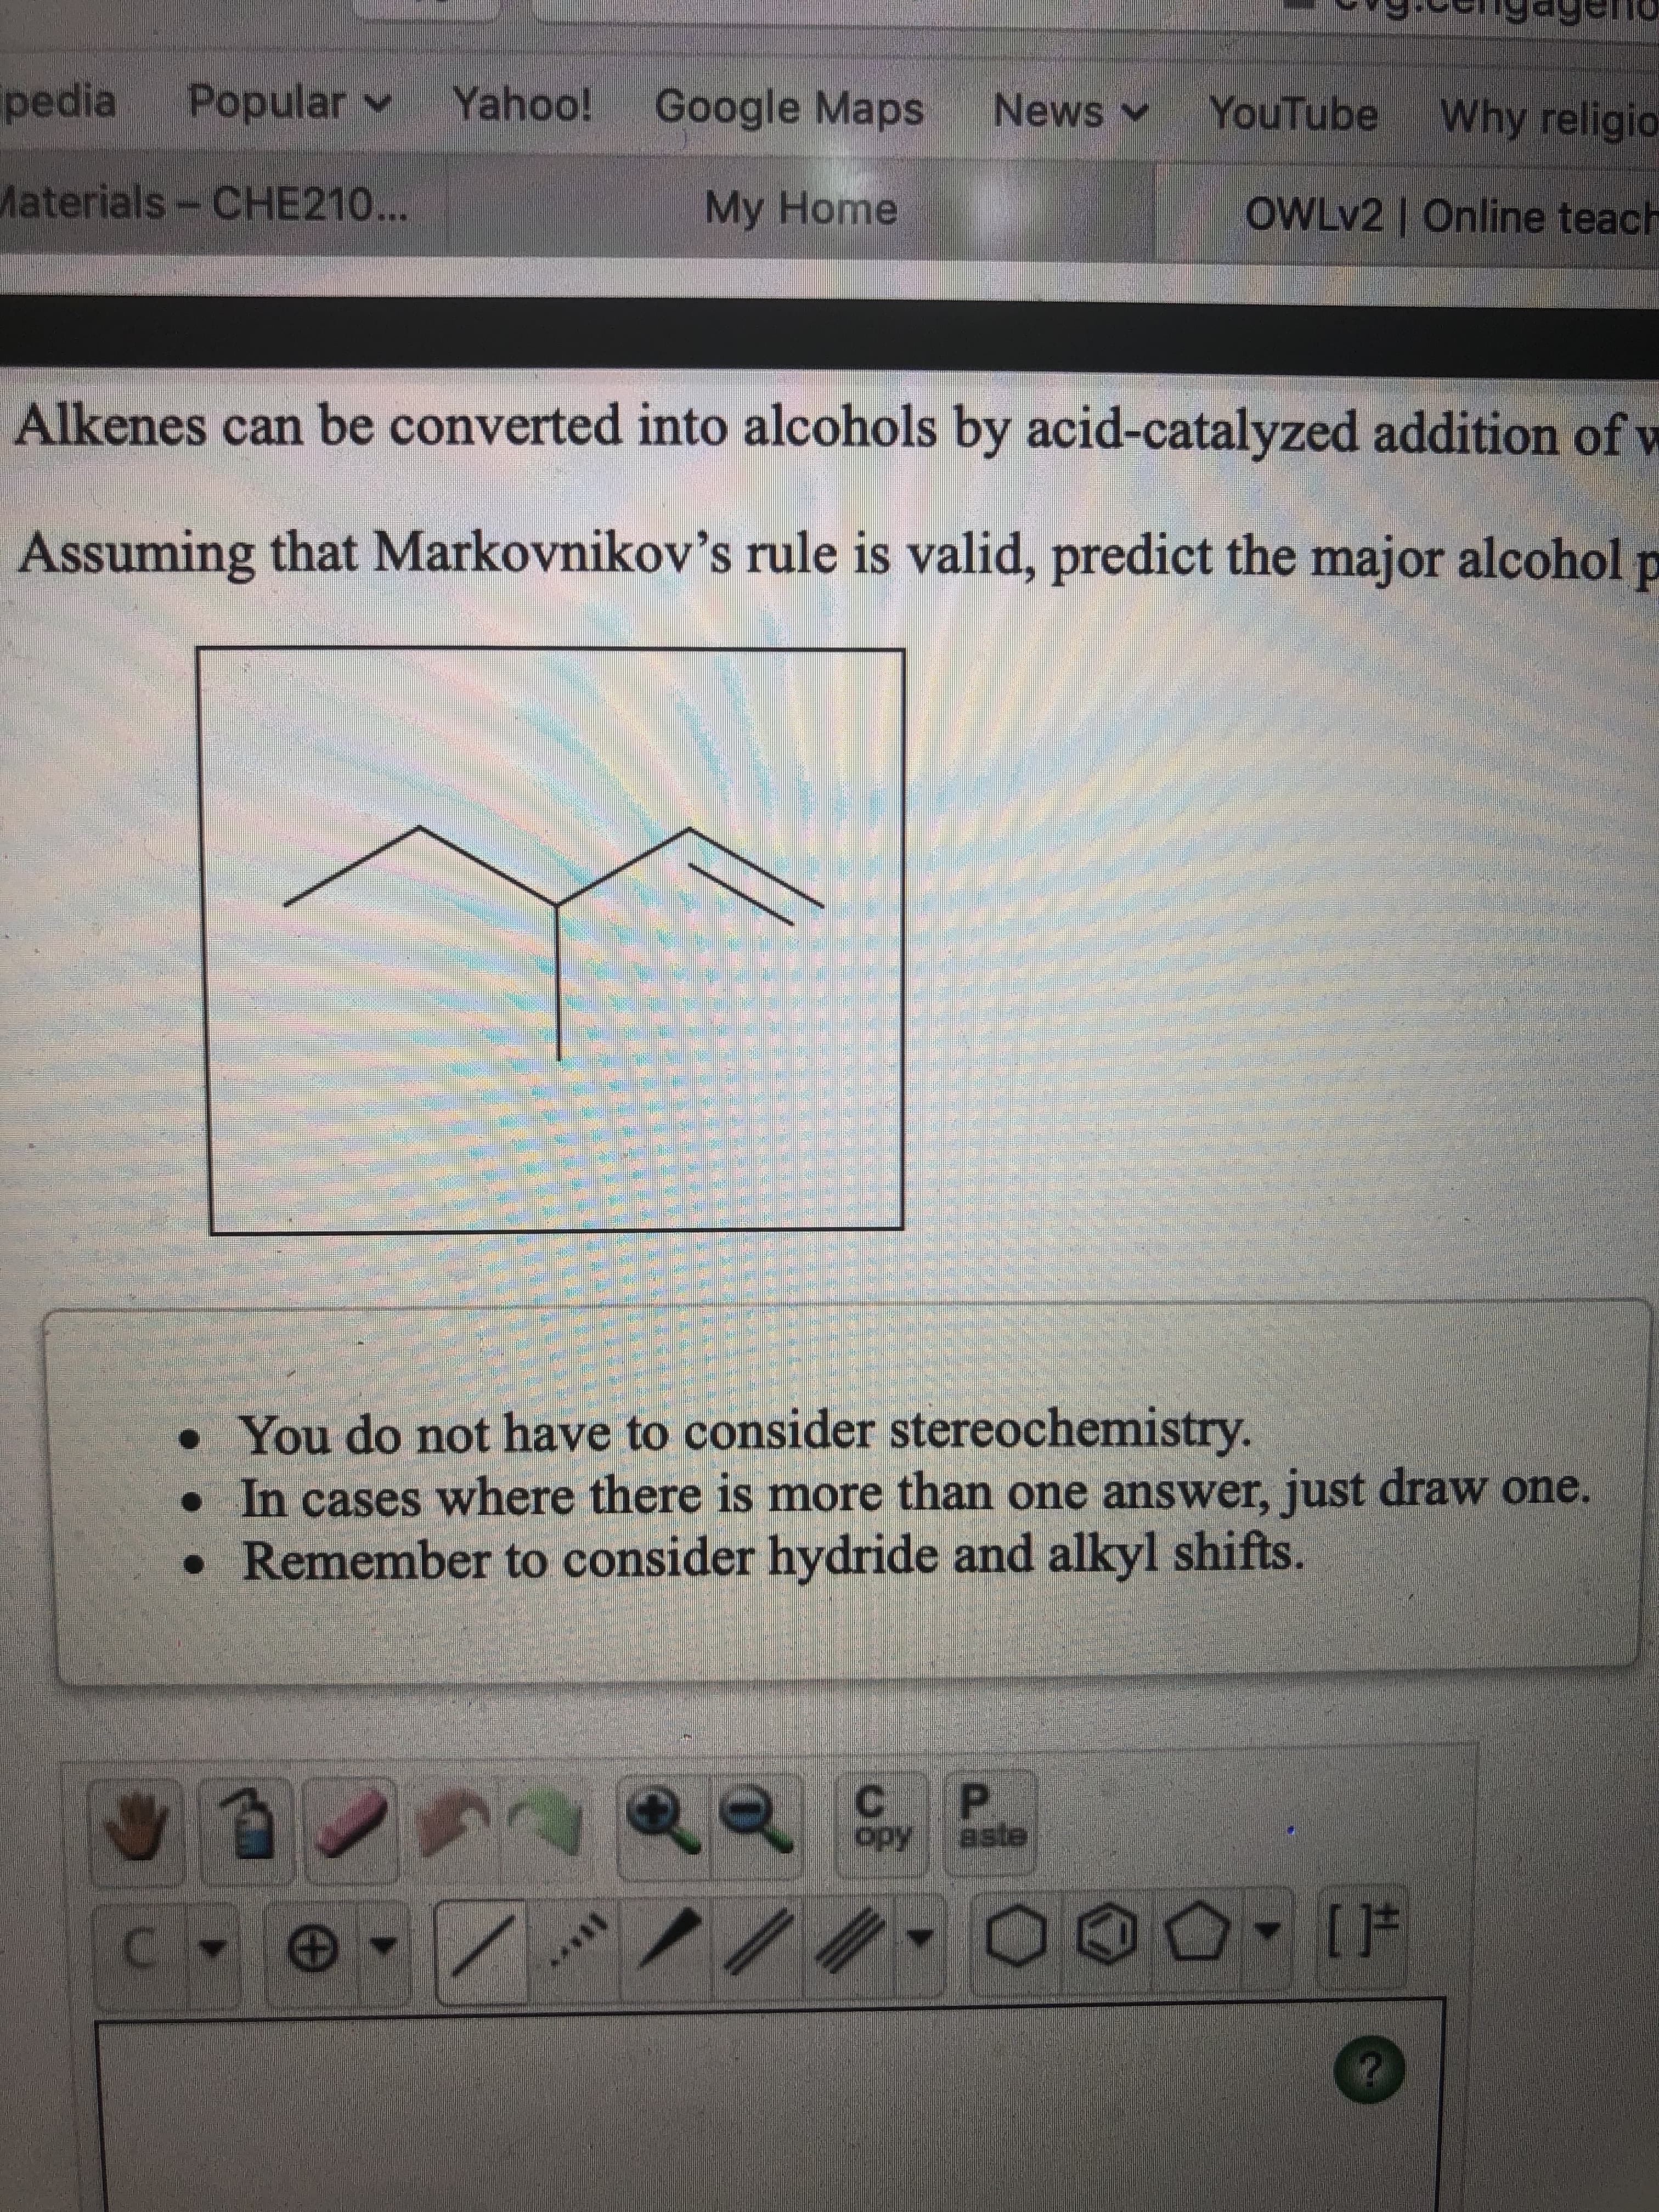 Alkenes can be converted into alcohols by acid-catalyzed addition
